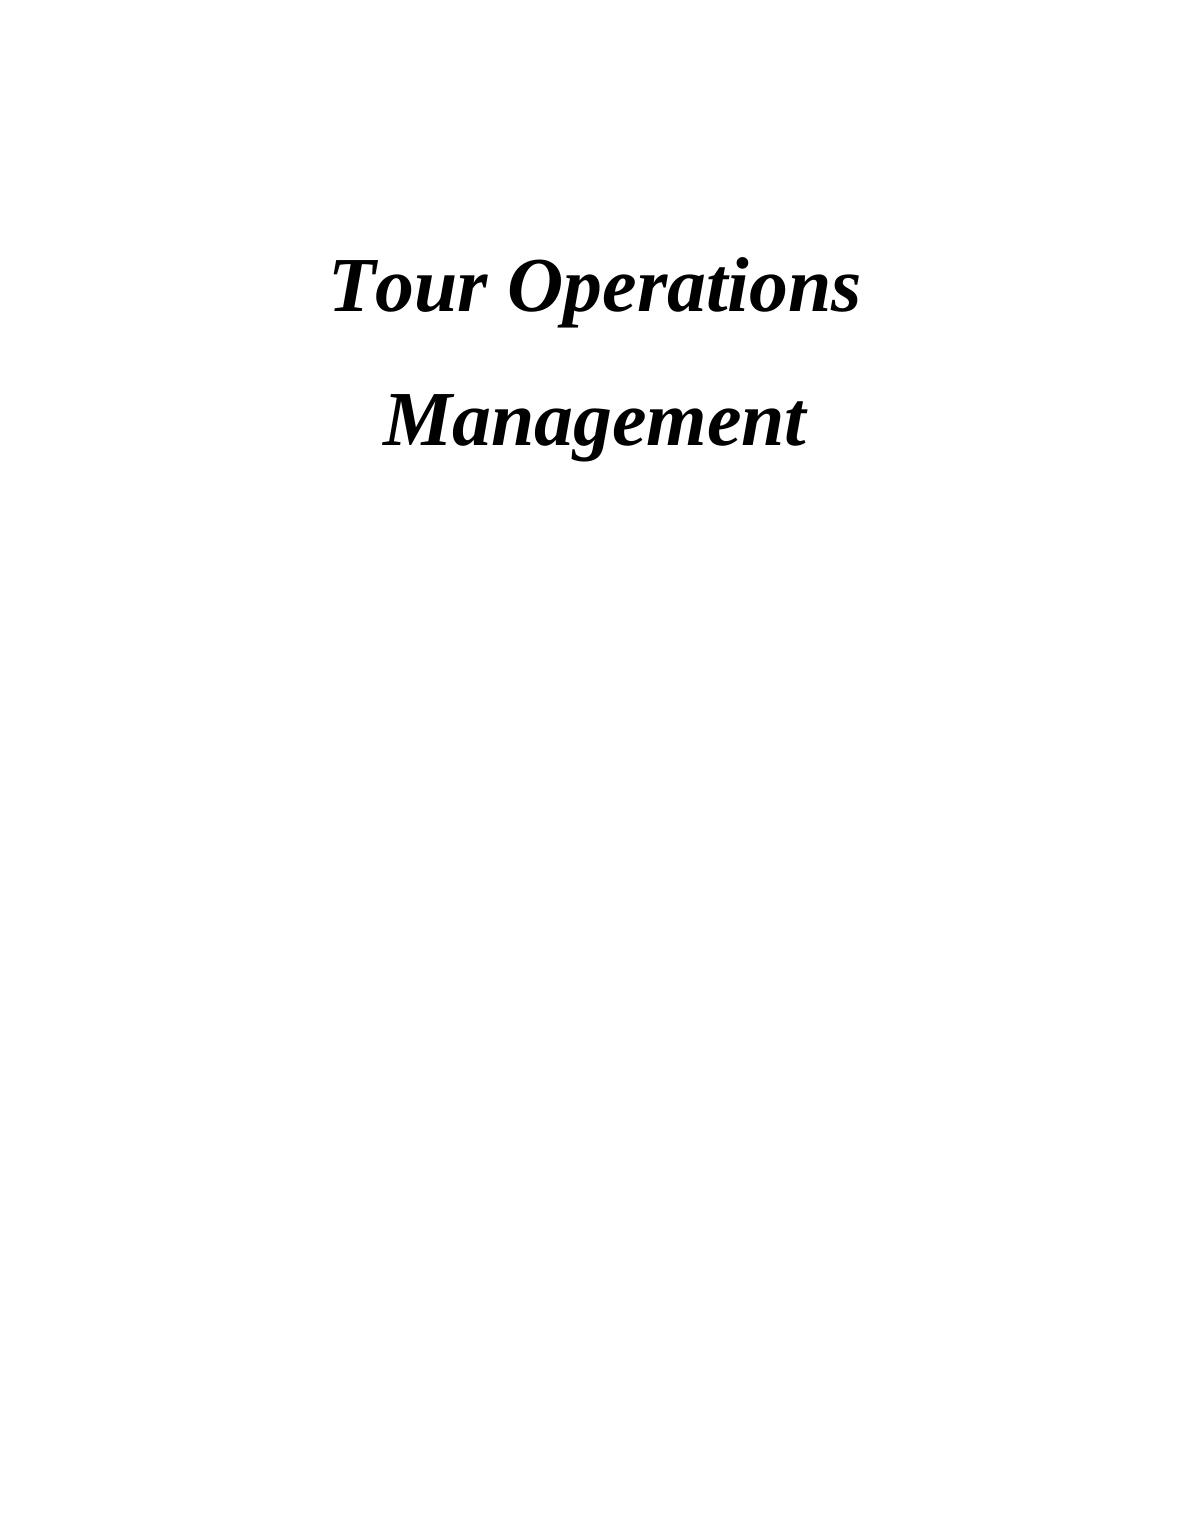 Tour Operations Management Assignment - LCB tours_1